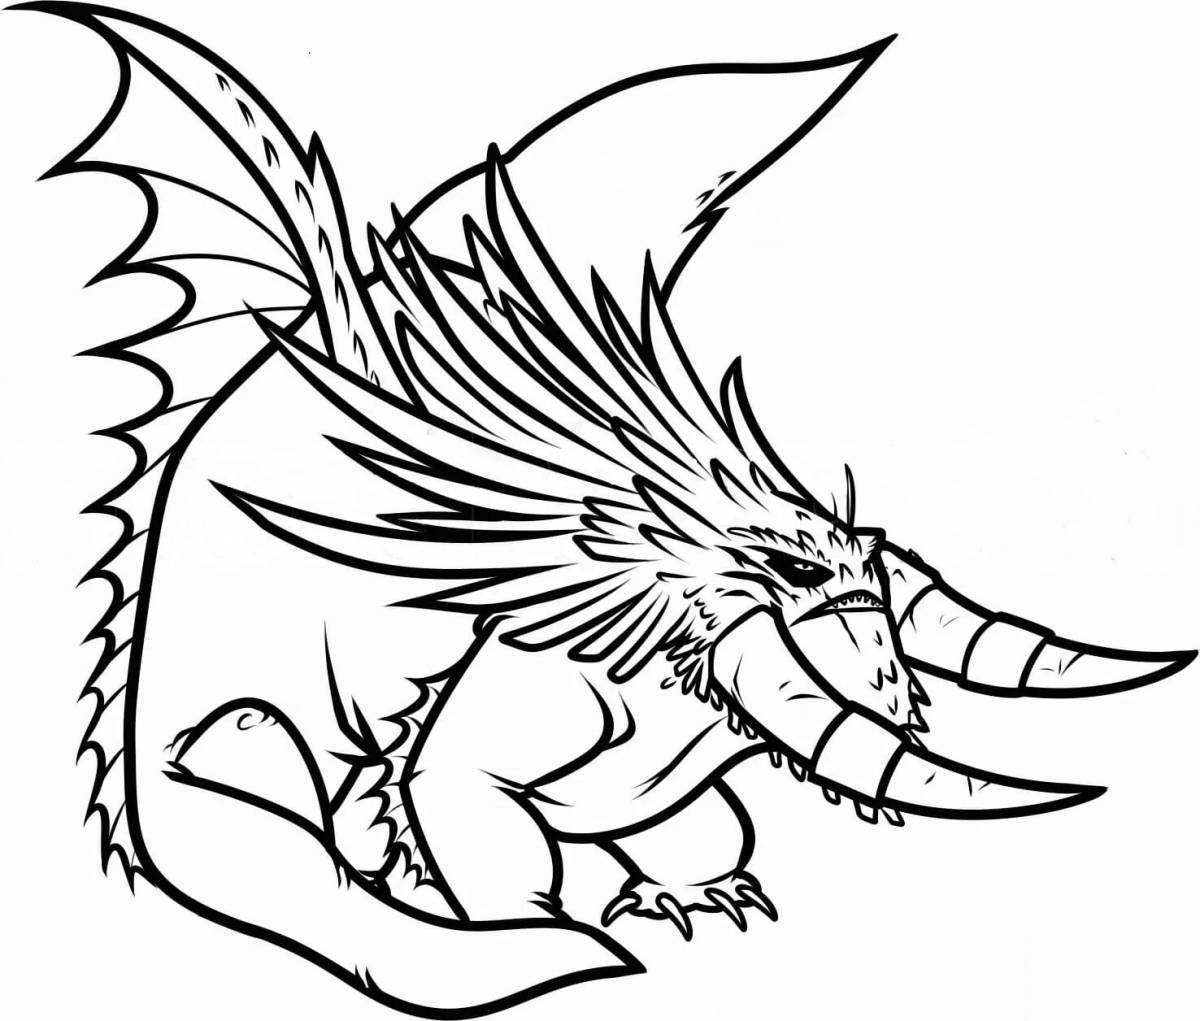 Gorgeous cauldron how to train your dragon coloring book